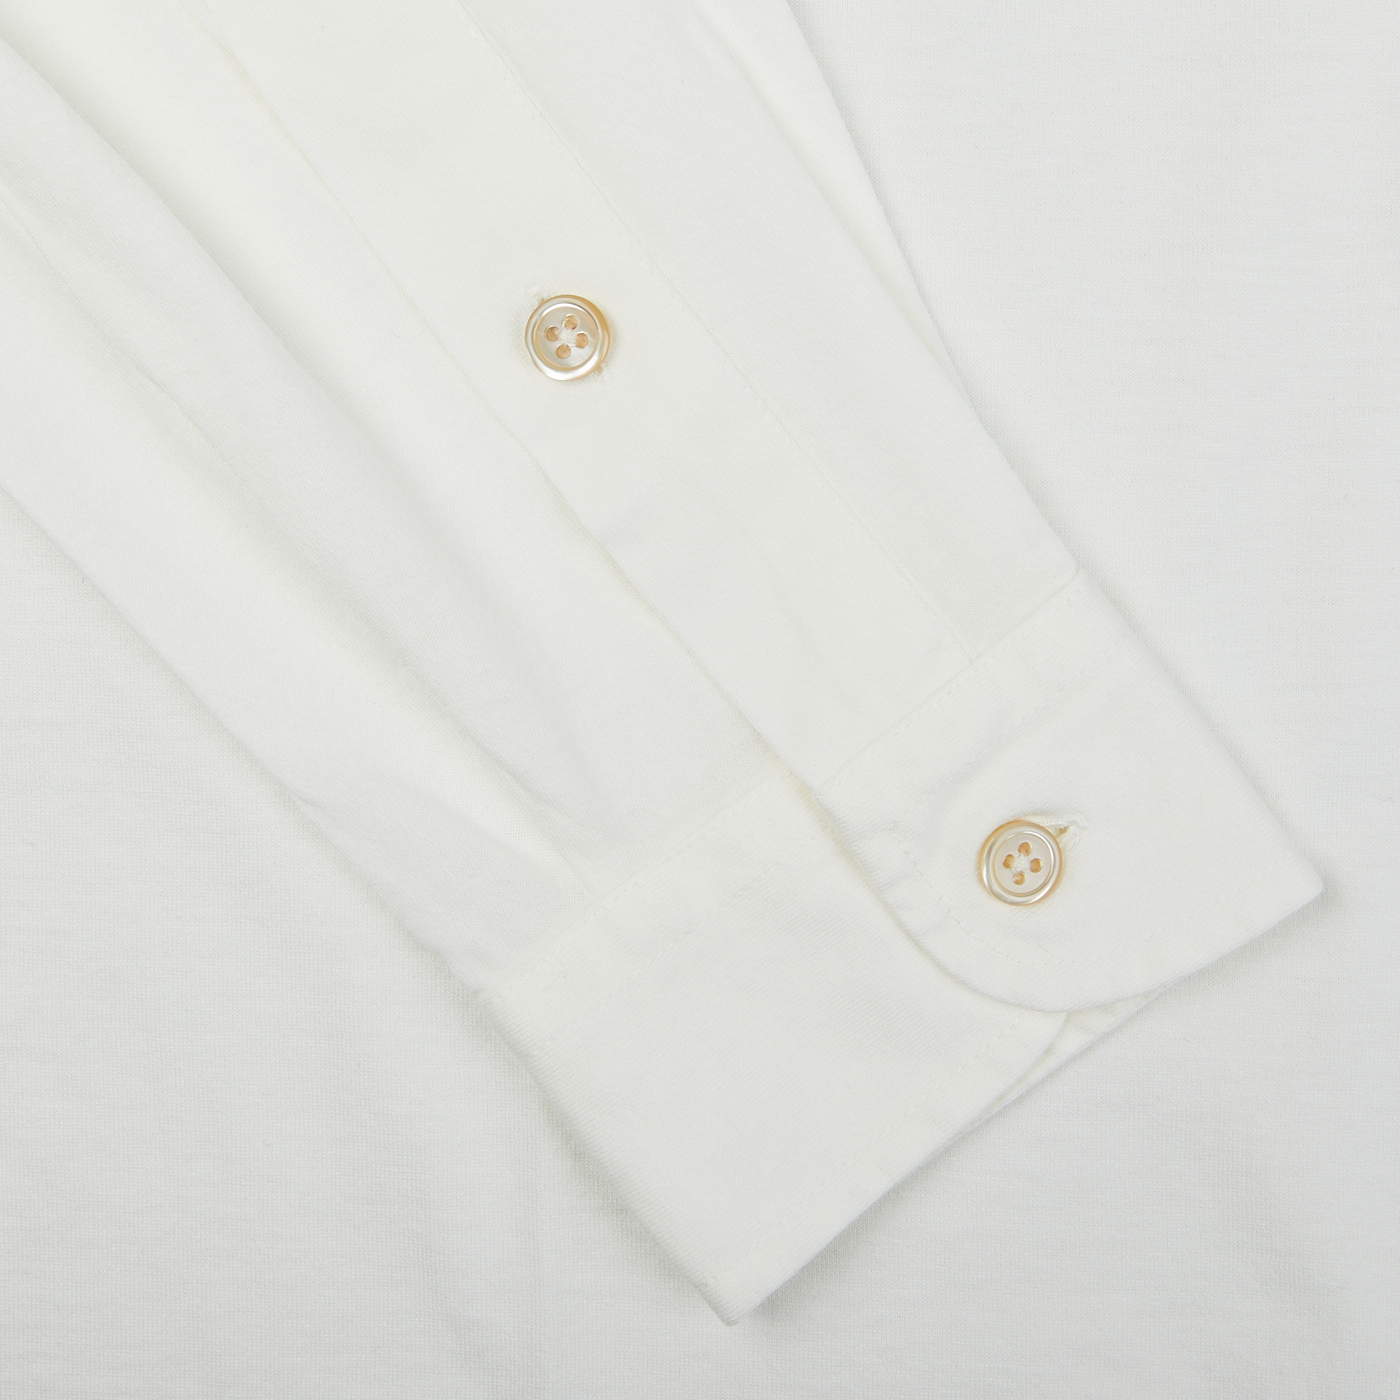 A close up of a Filippo de Laurentiis off white cotton jersey knitted shirt with gold buttons.